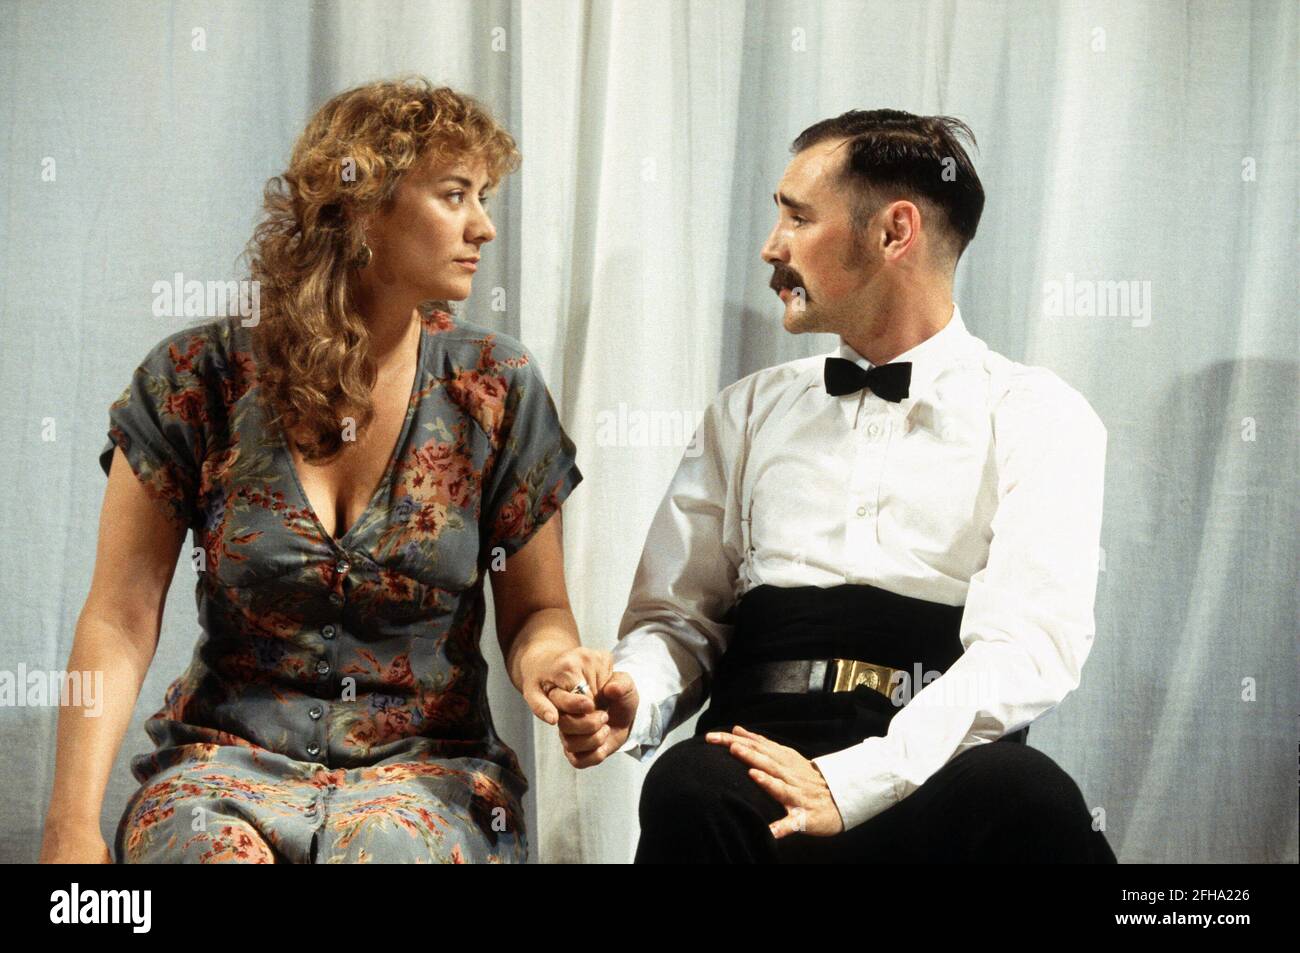 Janet McTeer (Beatrice), Mark Rylance (Benedick) in MUCH ADO ABOUT NOTHING by Shakespeare at the Queen's Theatre, London W1  06/07/1993  design: Neil Warmington  lighting: Rick Fisher  director: Matthew Warchus Stock Photo